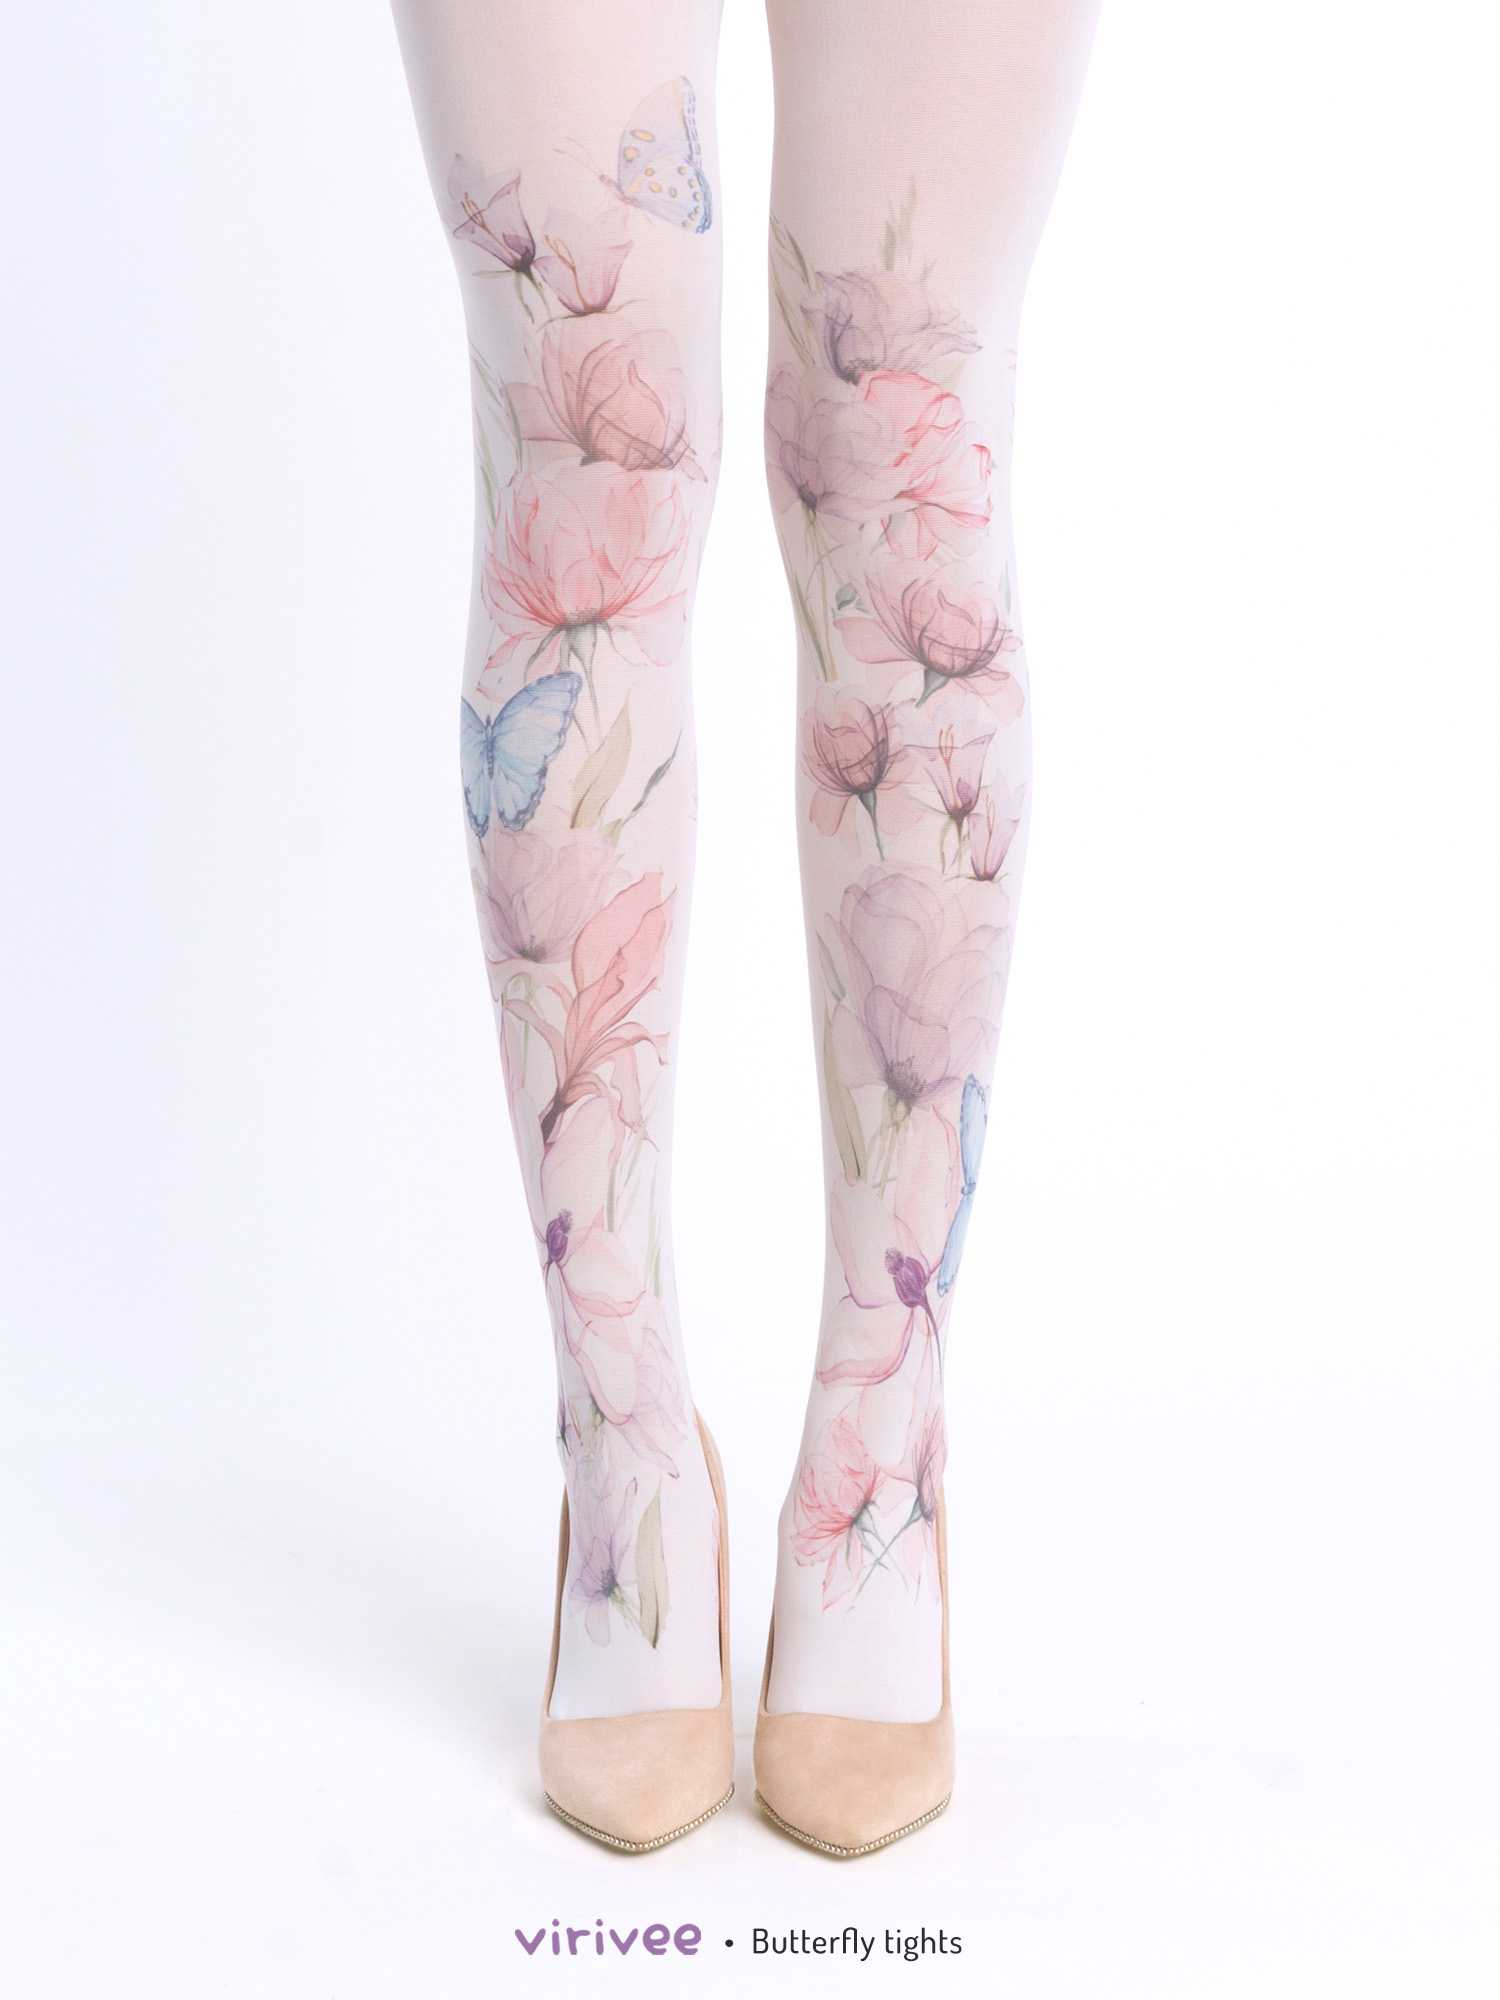 Floral and butterfly tights by Virivee